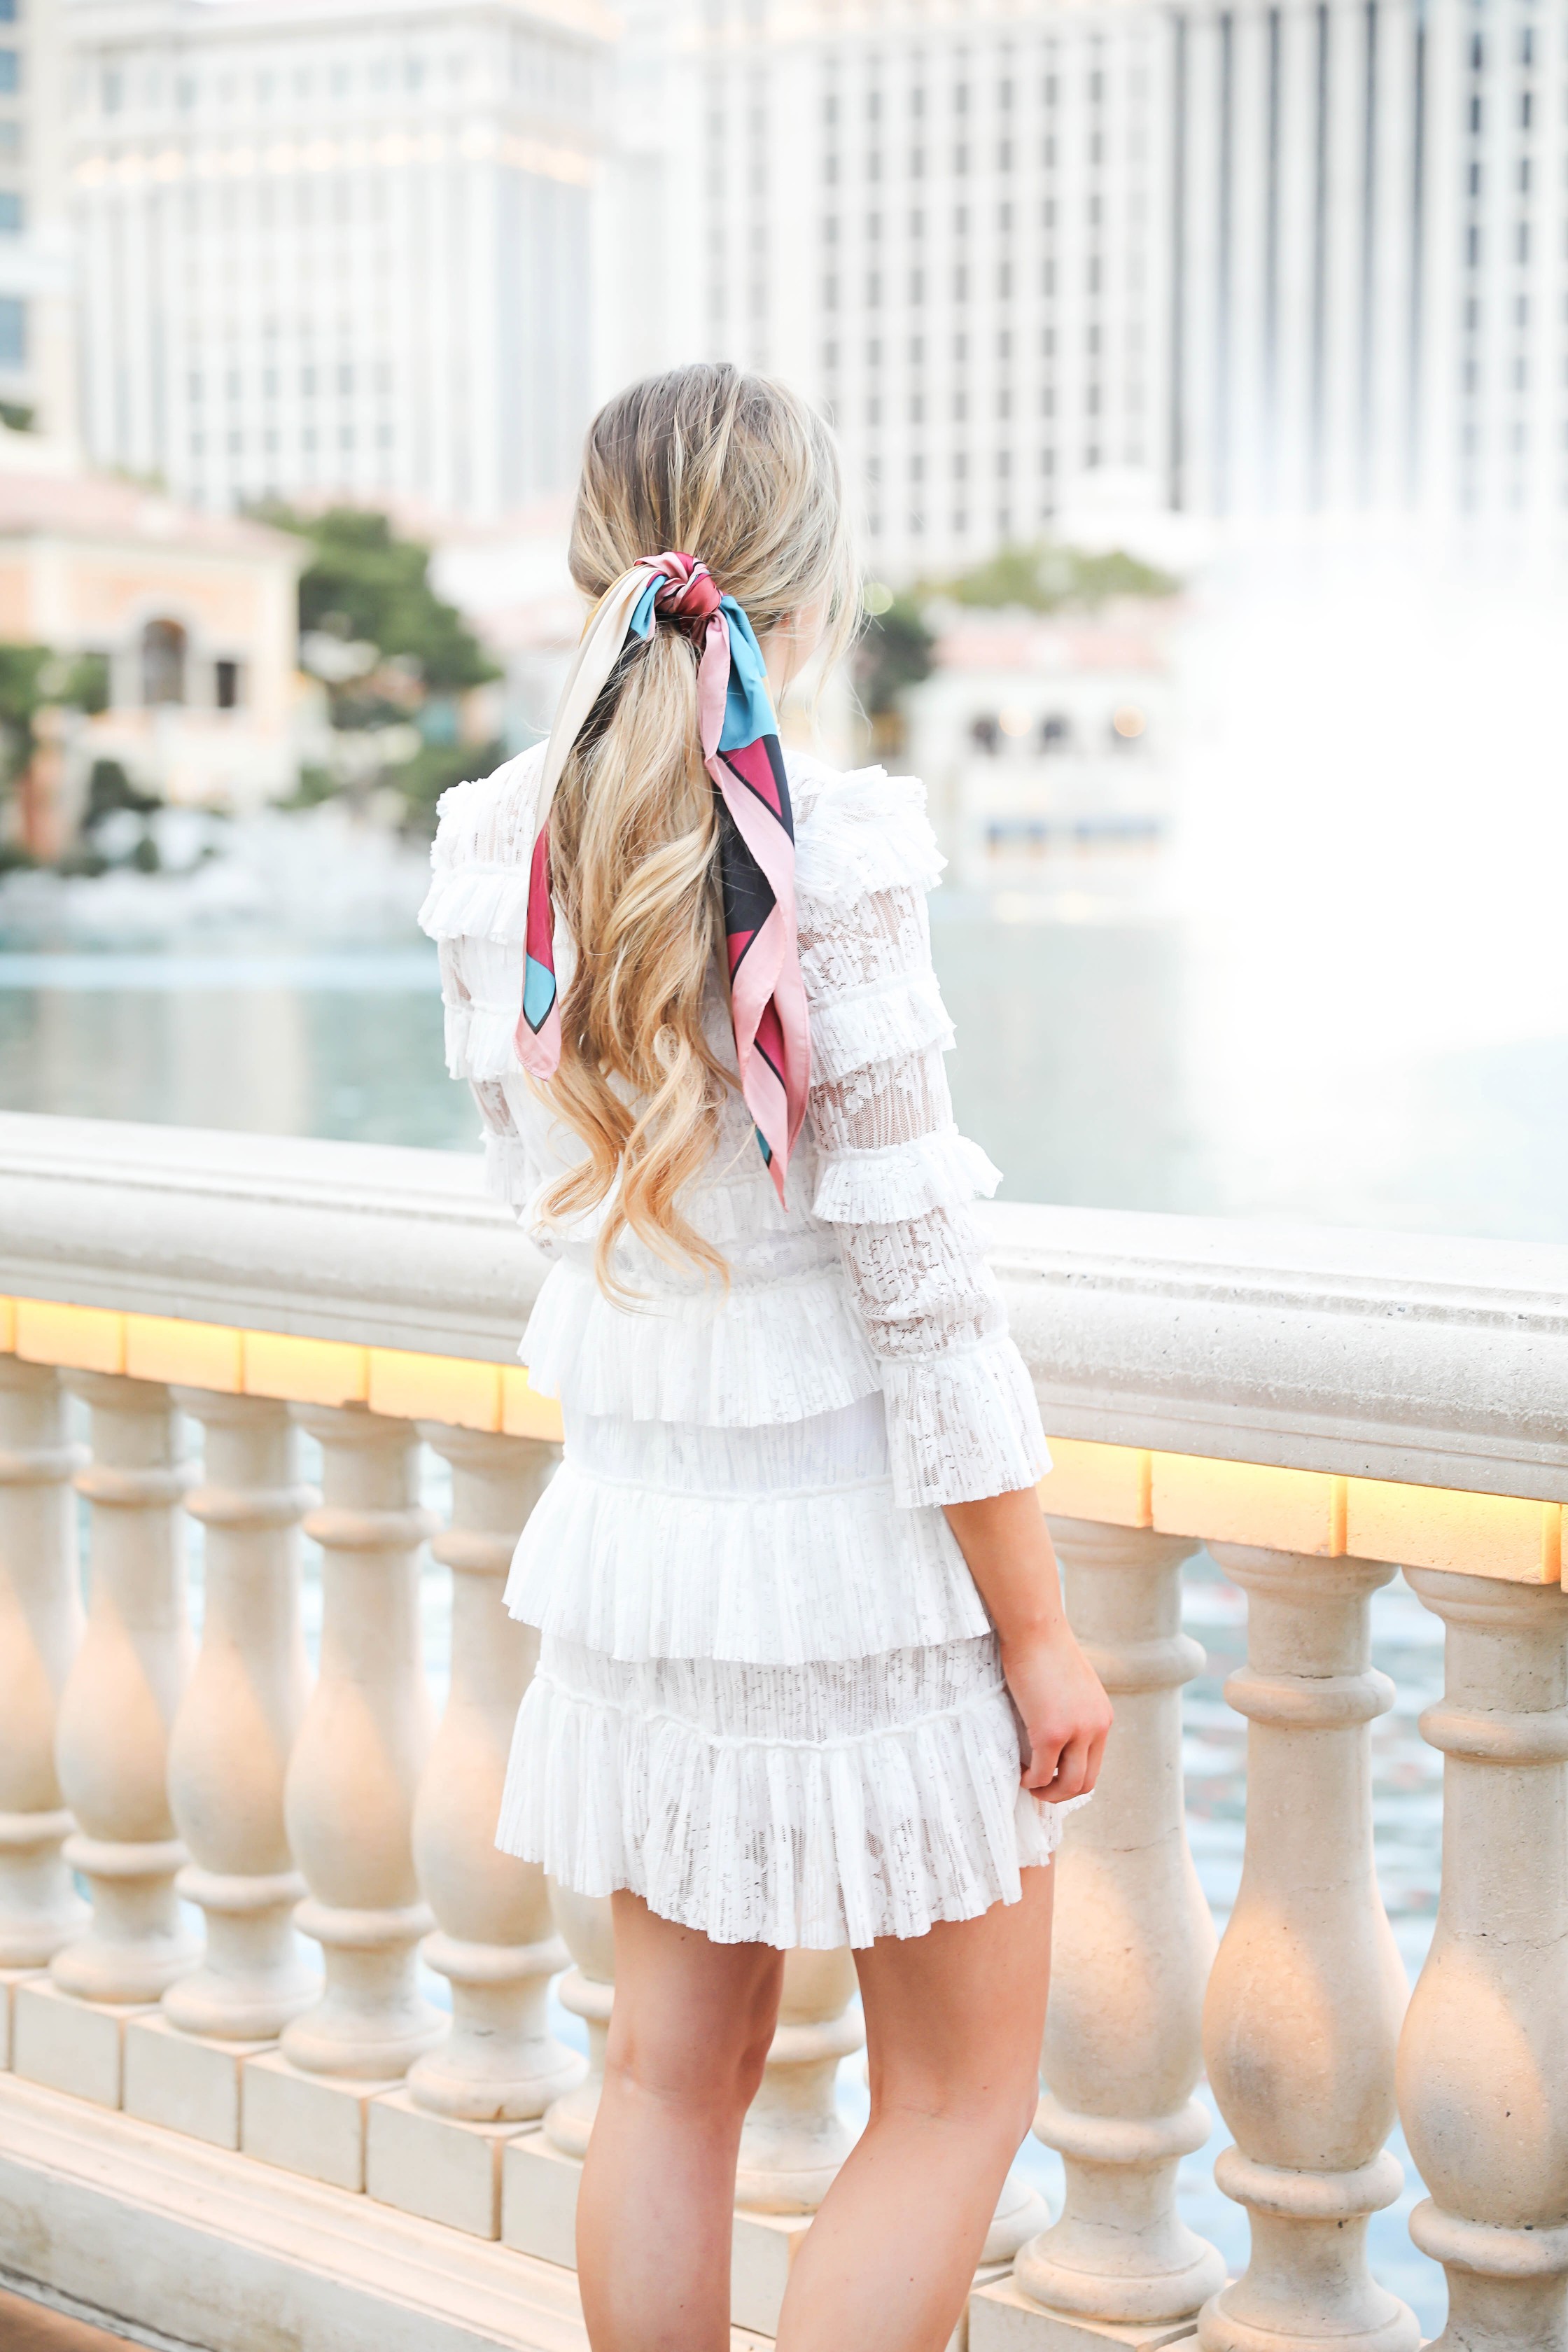 Bellagio fountains in Las Vegas! Wearing a white lace dress and scarf in my pony tail! Las Vegas style! Las vegas blogger! Details on daily dose of charm by lauren lindmark